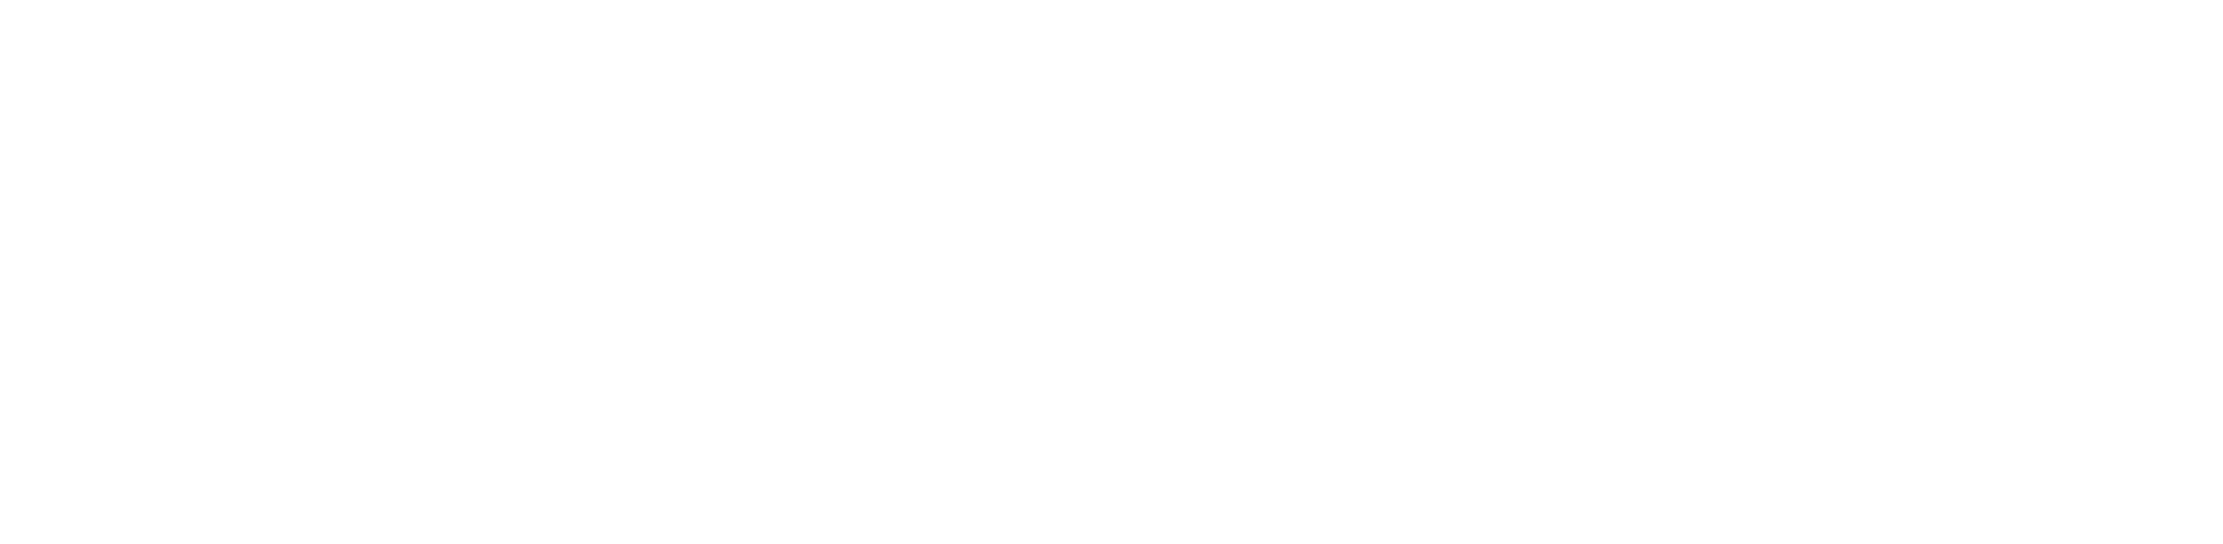 Chaddock - Every Child Deserves a Chance